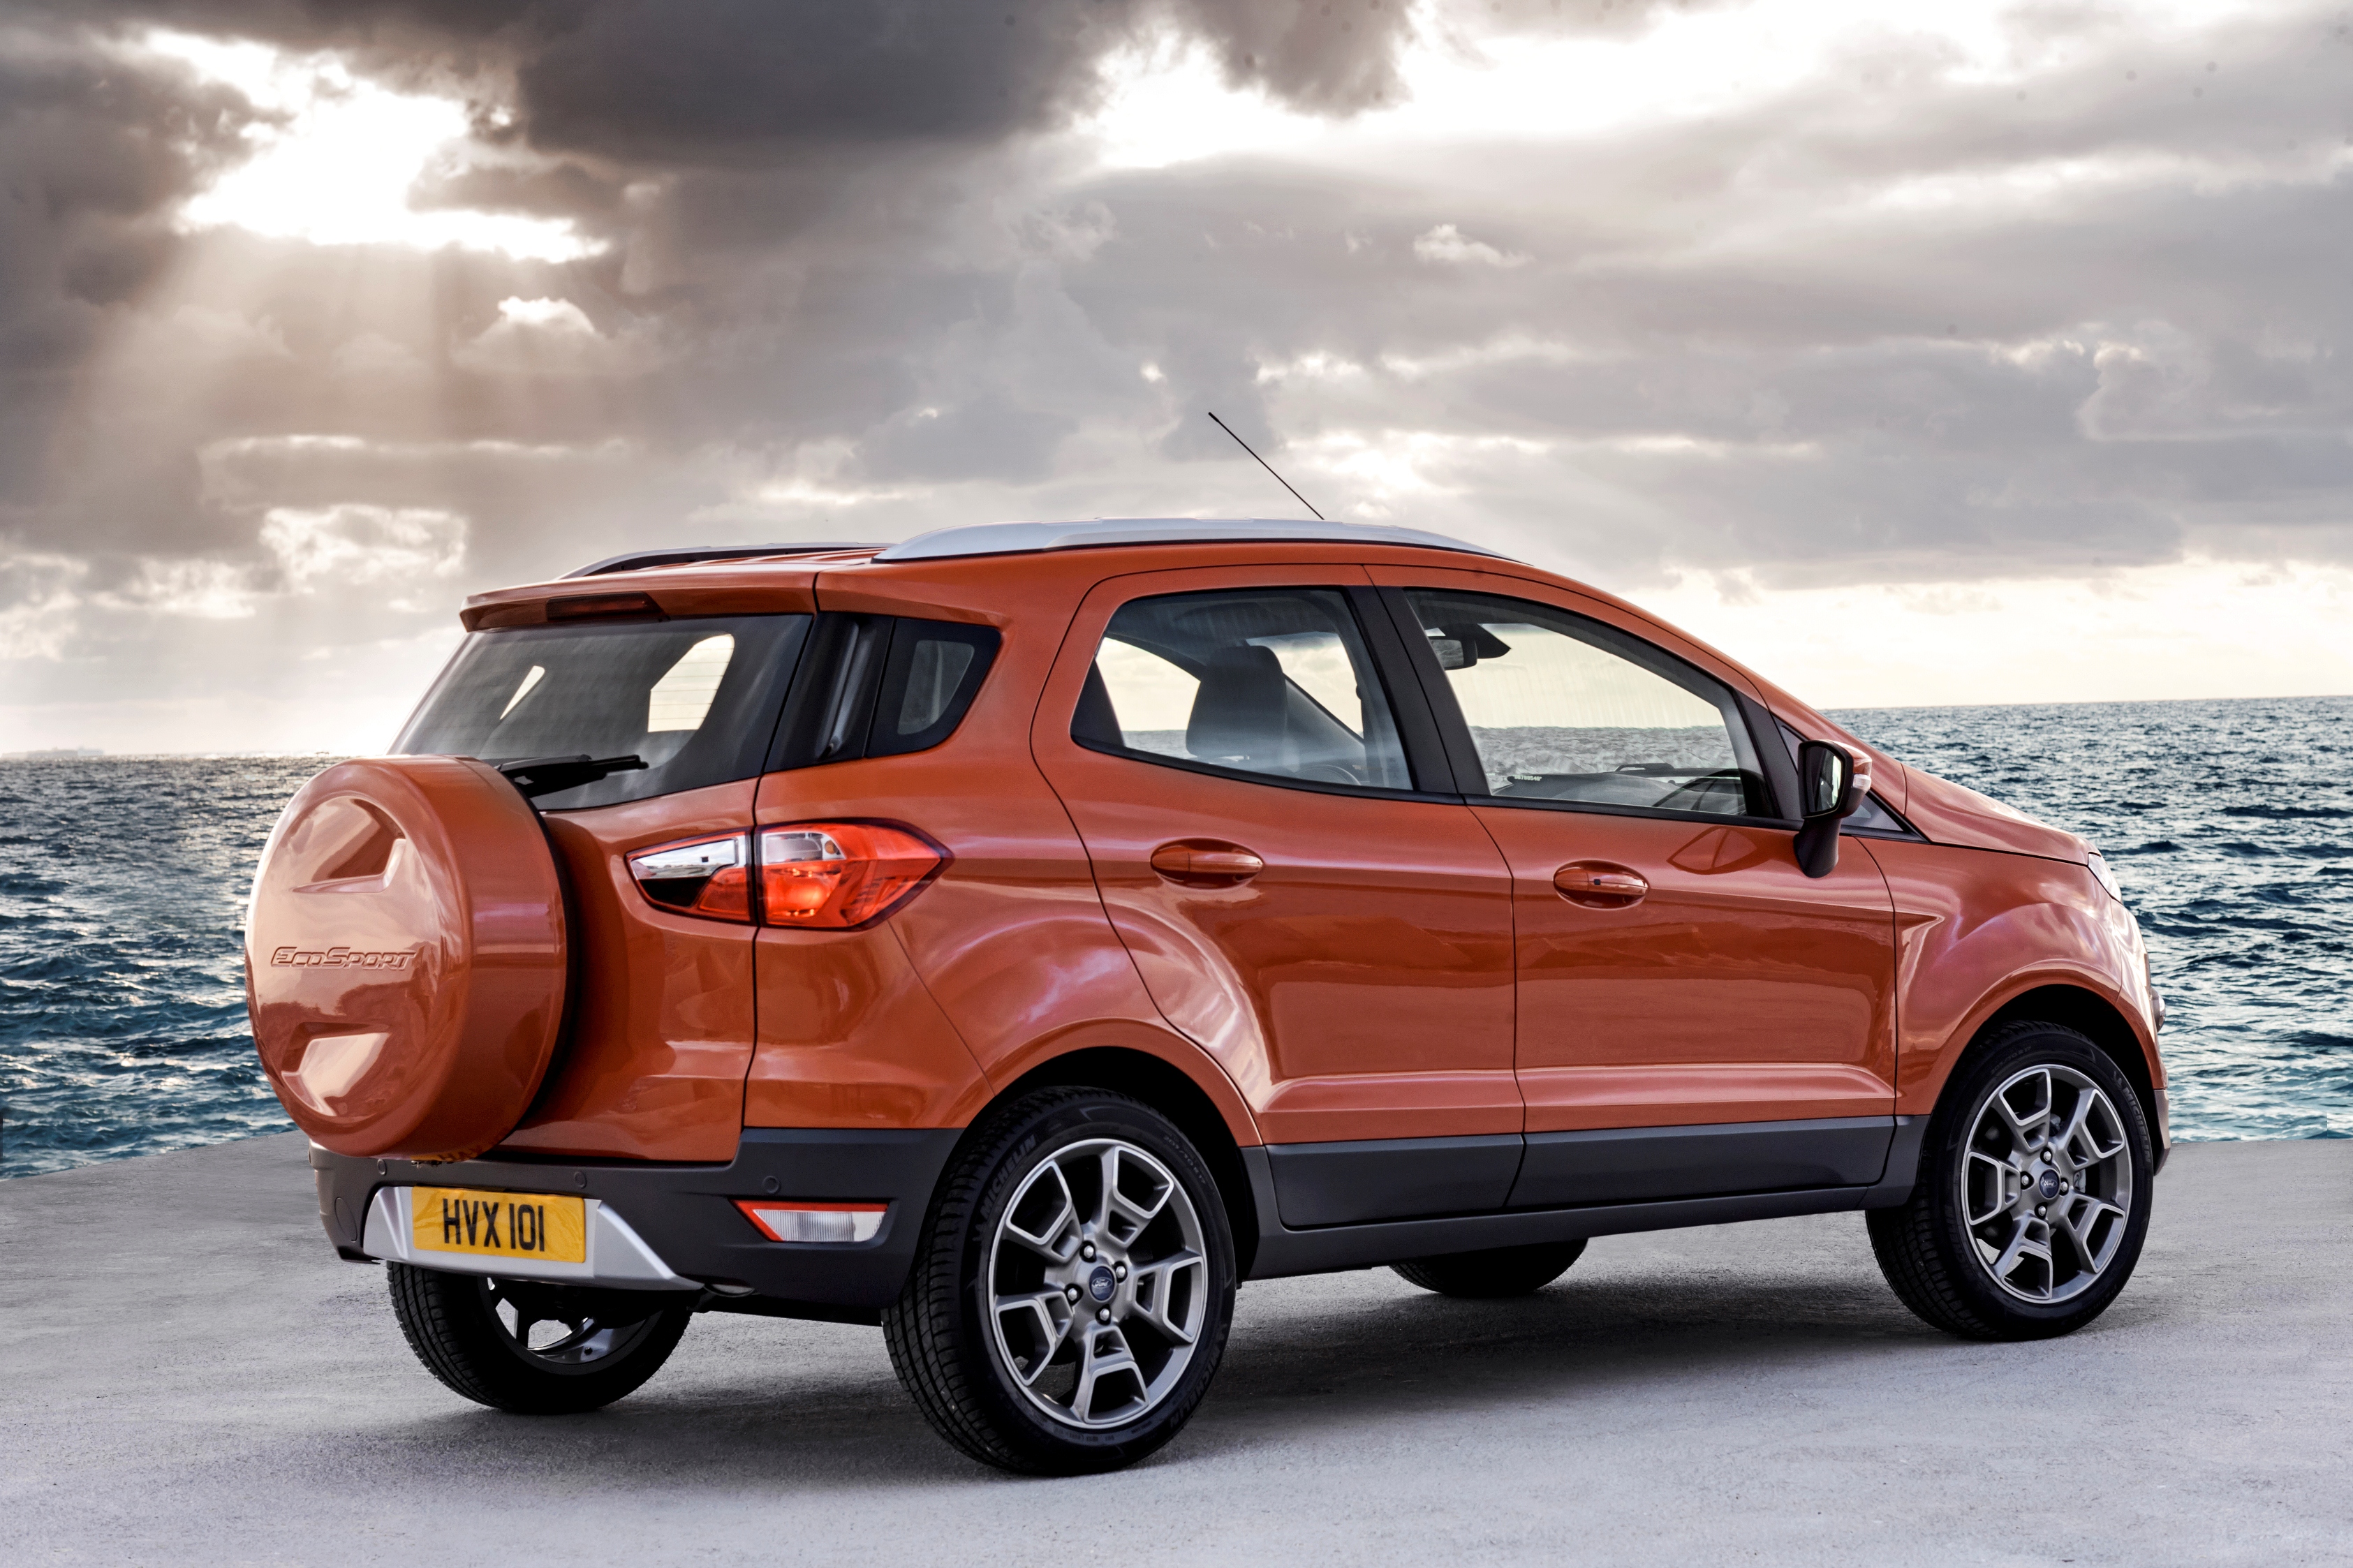 Ford EcoSport hd specifications